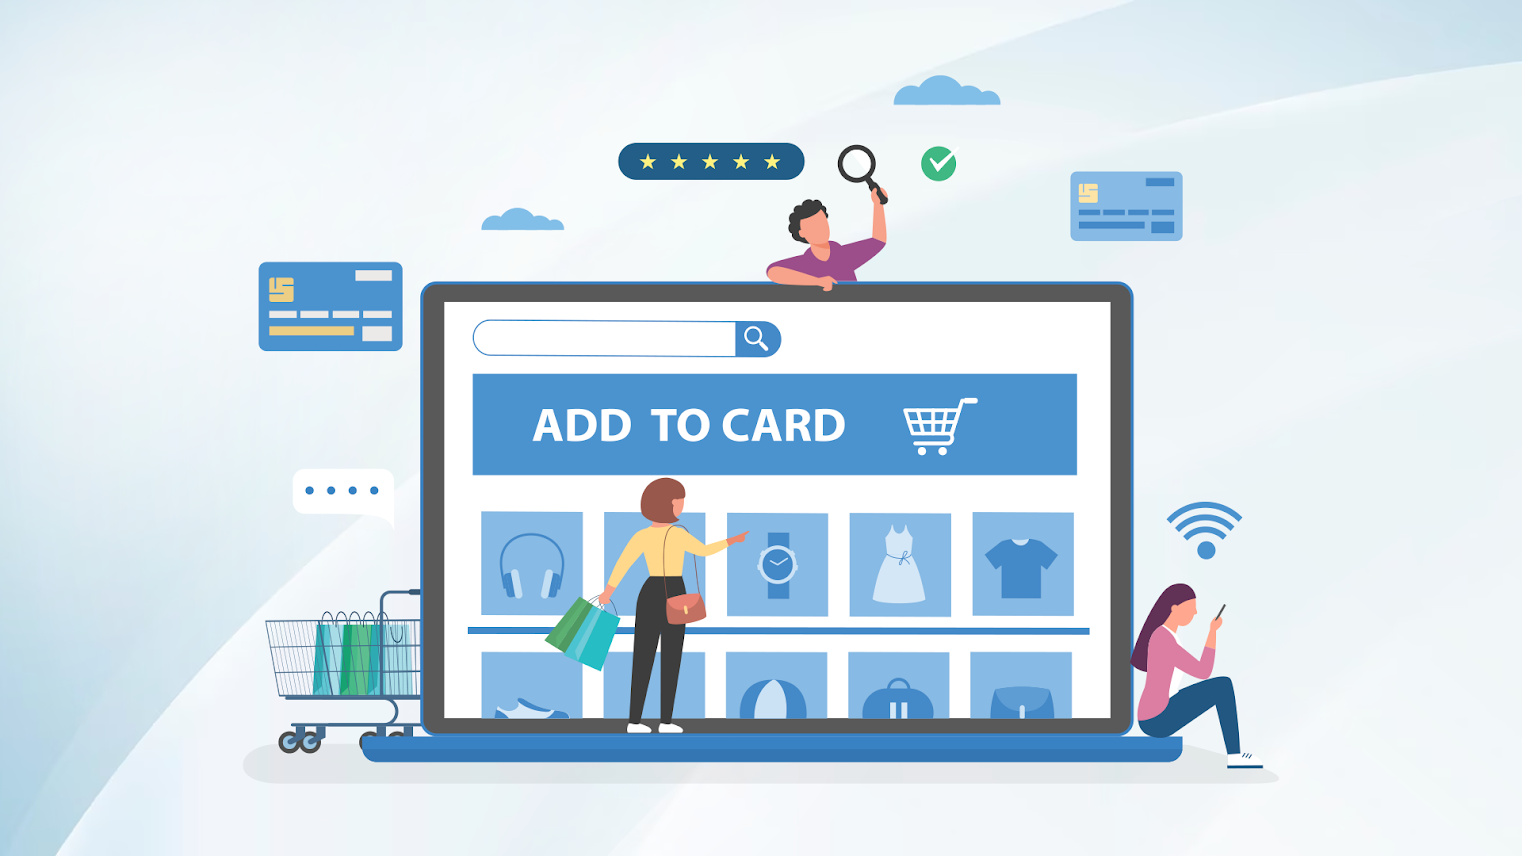 Ecommerce web design and development company providing services for Magento, PrestaShop, BigCommerce, Woocommerce, Shopify, ecommerce, and CS-Cart with 15+ years of expertise